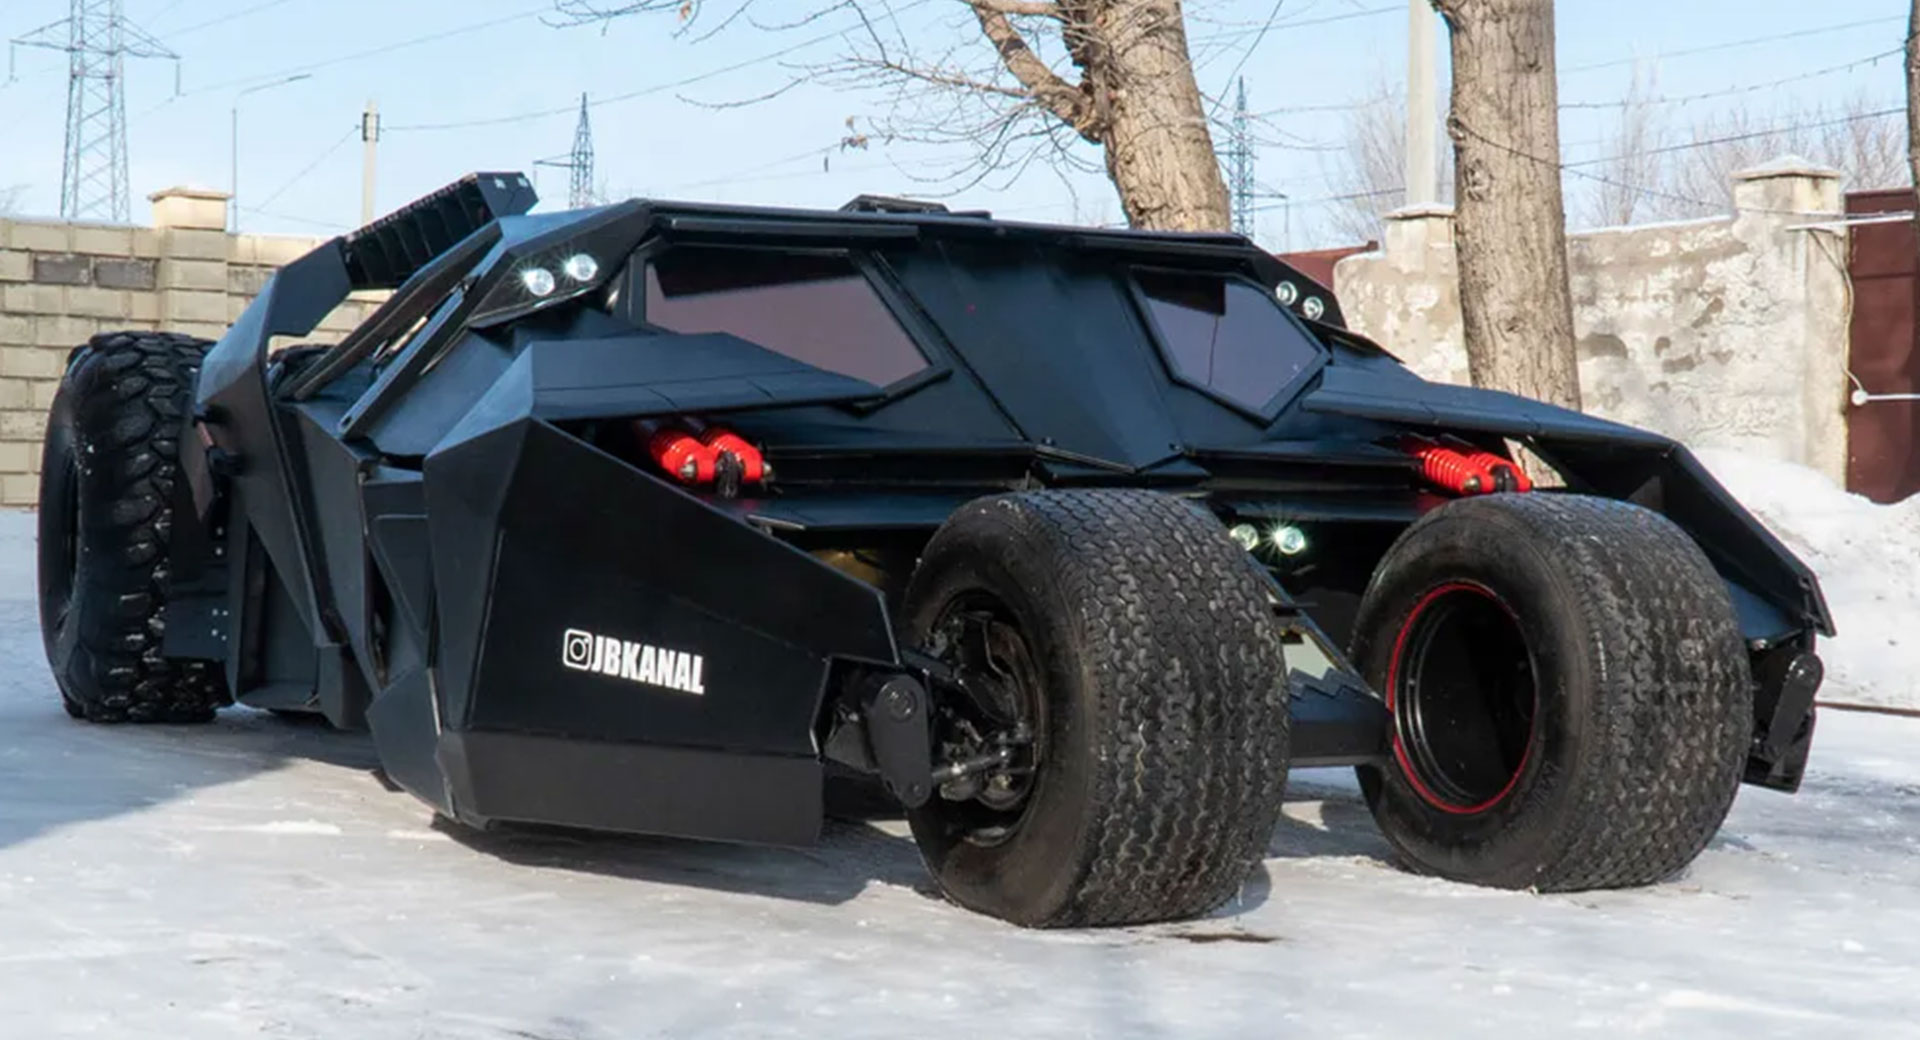 Yes, you can actually buy this badass electric Batmobile